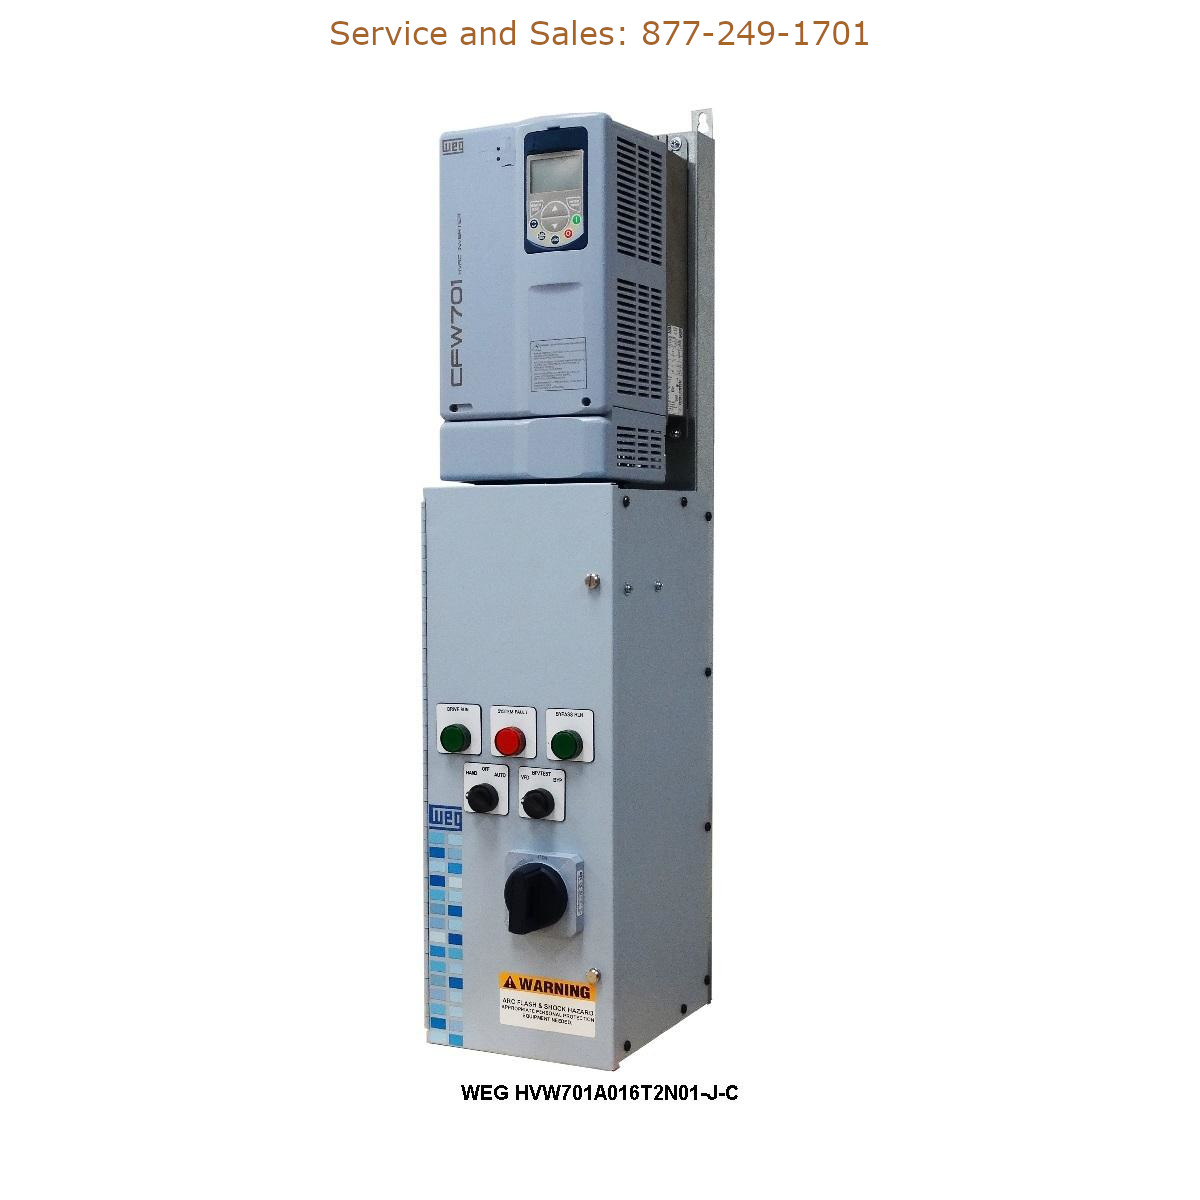 WEG HVW701A016T2N01-J-C WEG Model Number HVW701A016T2N01-J-C WEG Drives, Variable Speed Drives Repair Service, Troubleshooting, Replacement Parts https://gesrepair.com/wp-content/uploads/2022/WEG/WEG_HVW701A016T2N01-J-C_Drives_Variable_Speed_Drives.jpg